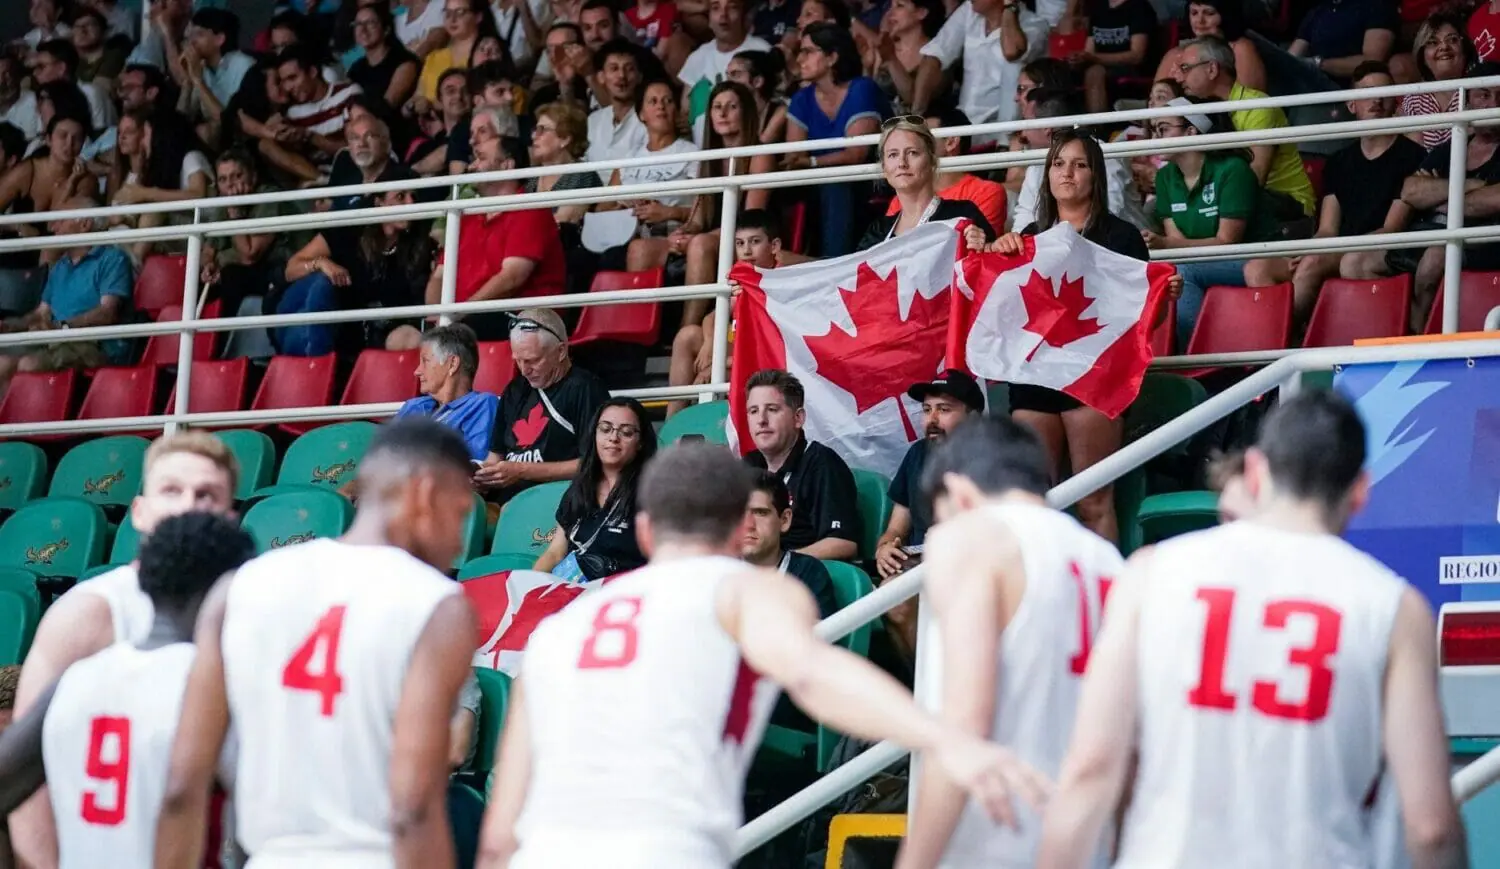 In this image: Two members from the crowd hold Canada flags.